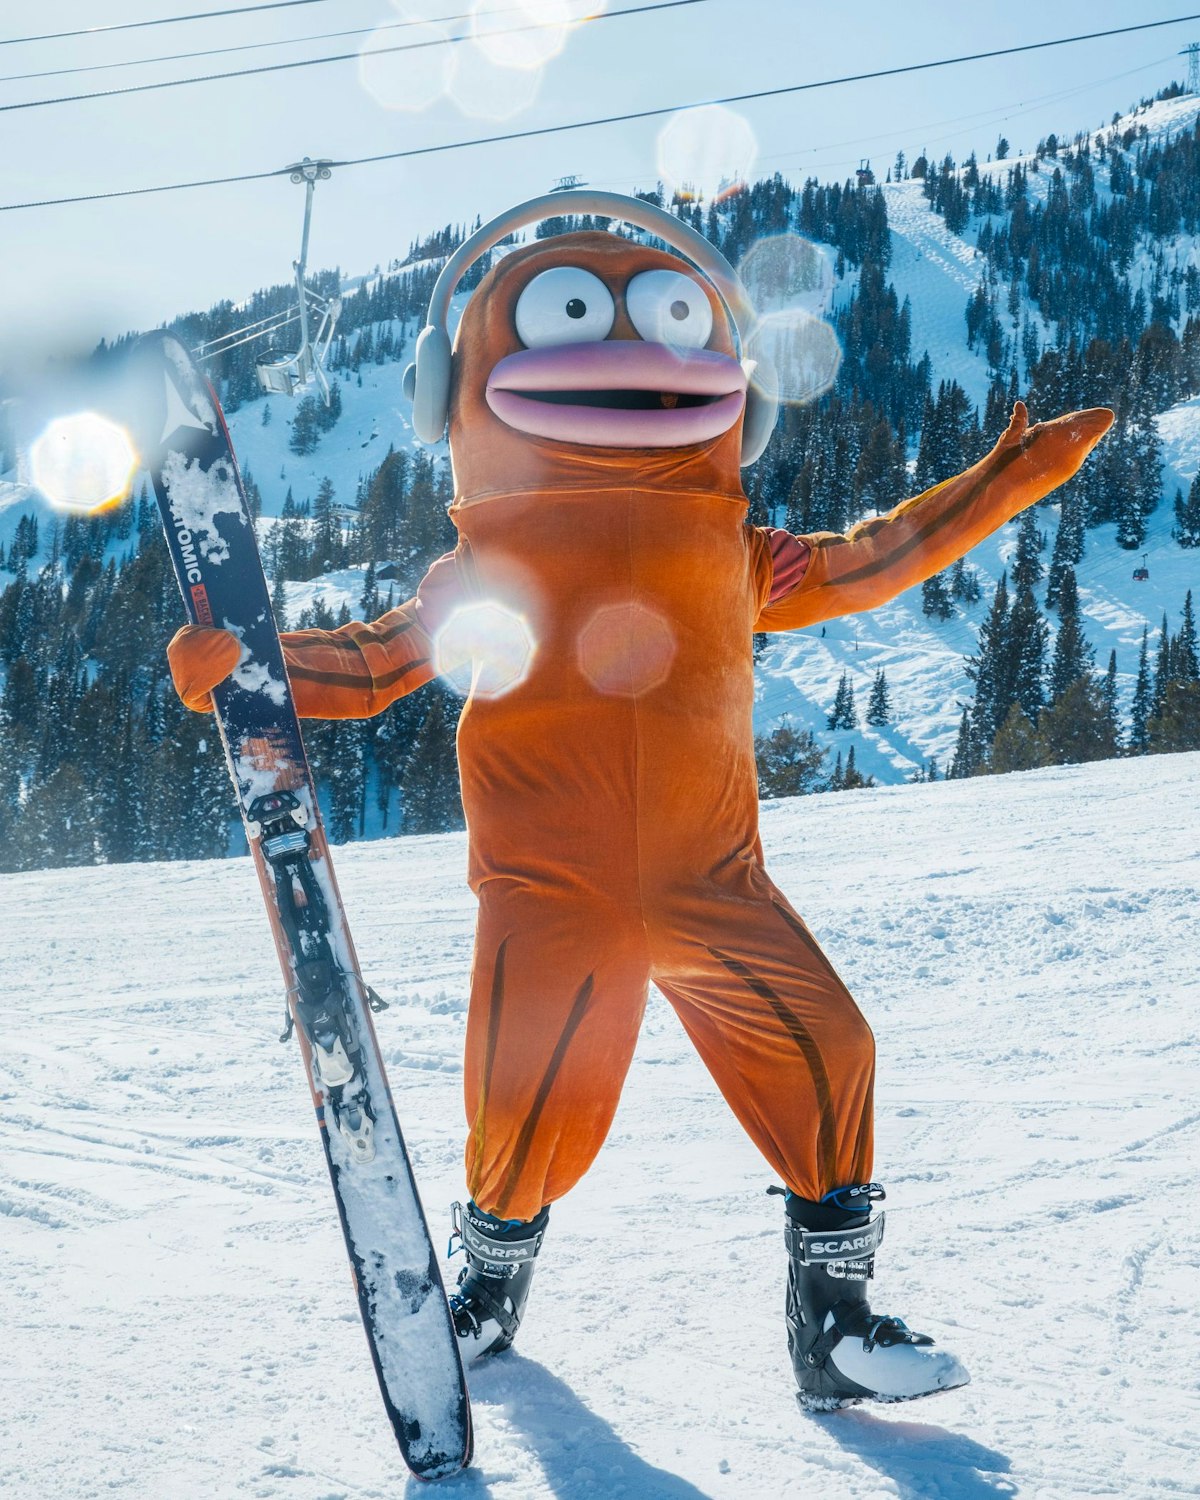 The GoldFish with skis on the mountain